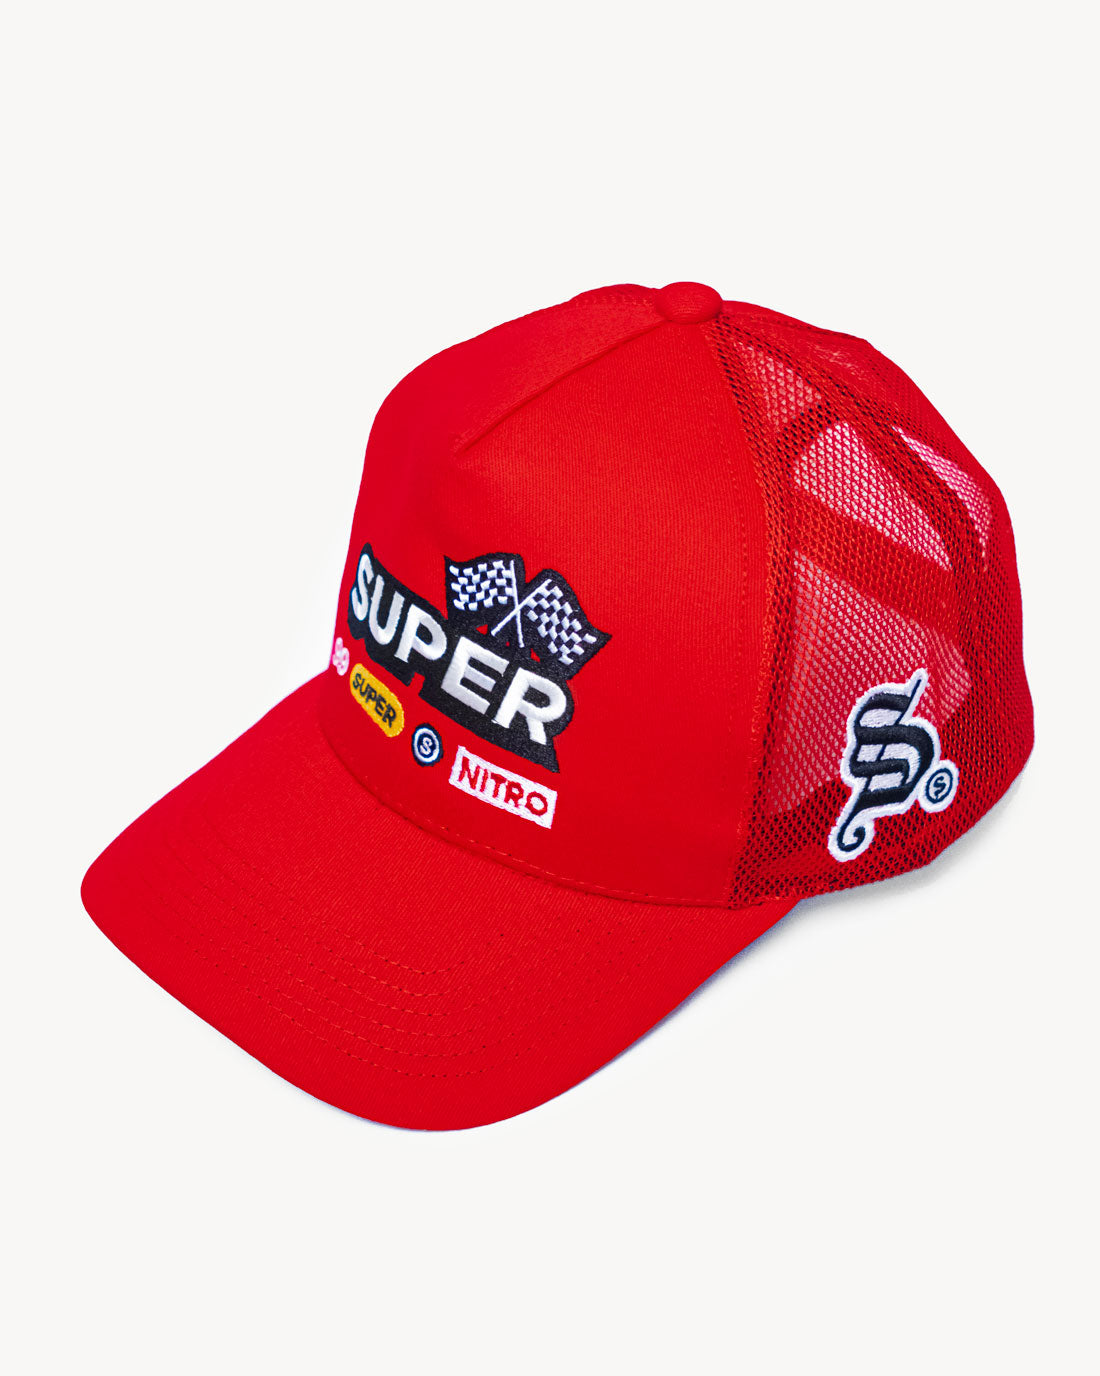 Front view of a vibrant red snapback hat with stylish racing-inspired embroidered design and cooling mesh back.